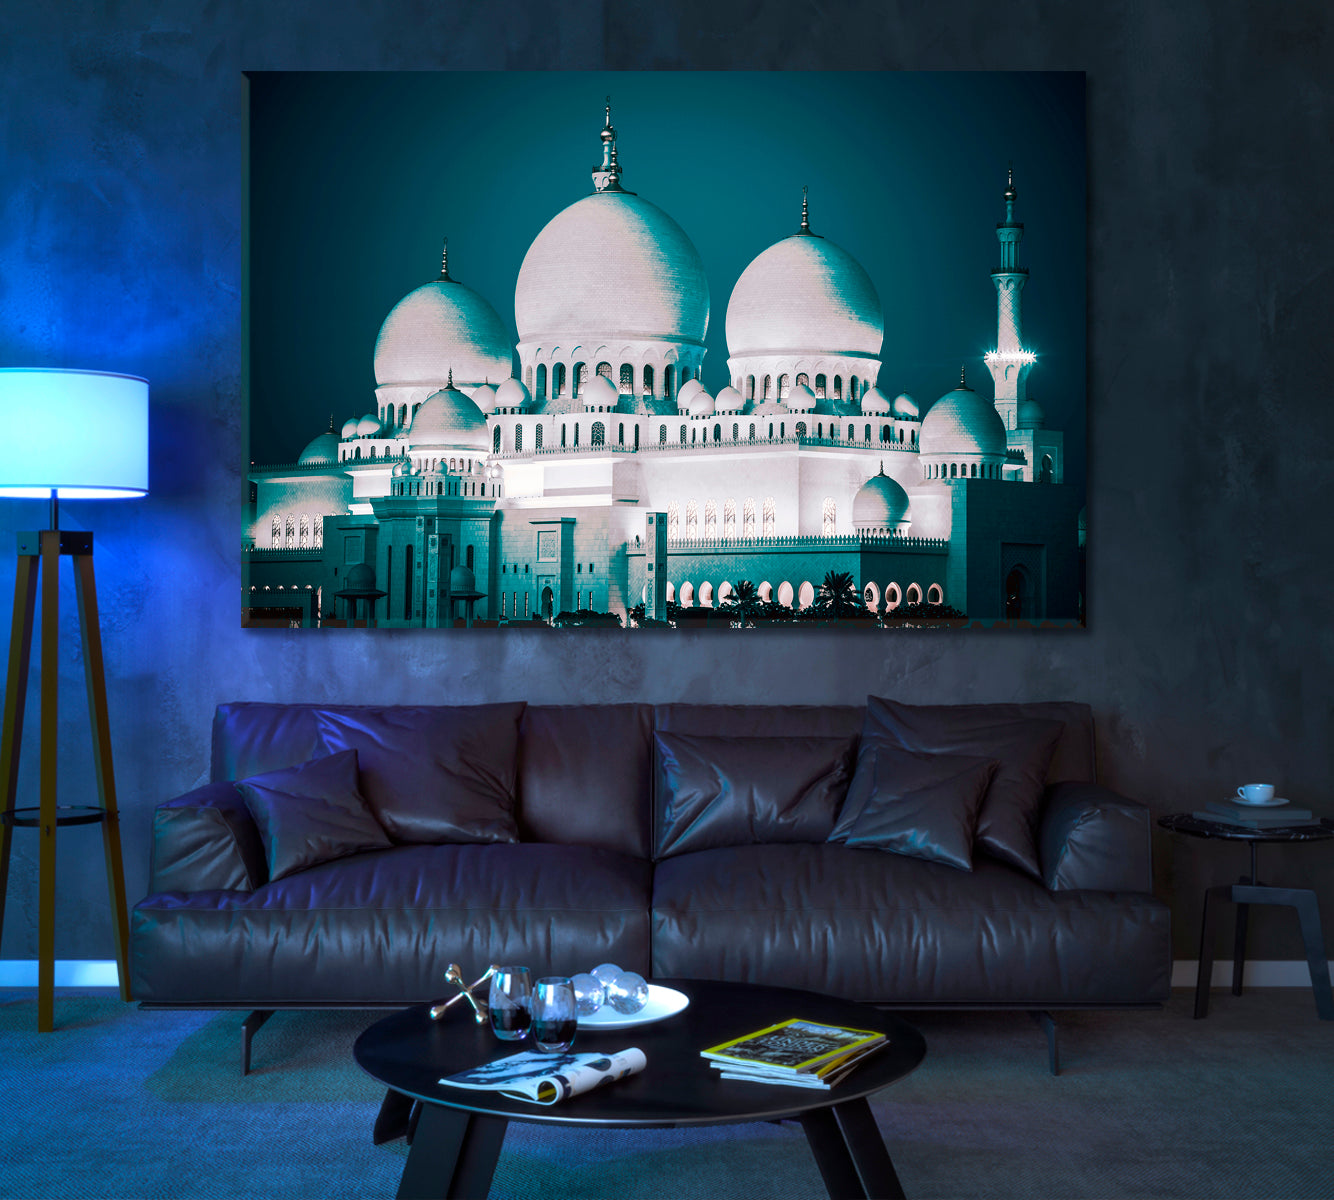 Sheikh Zayed Grand Mosque UAE Canvas Print ArtLexy 1 Panel 24"x16" inches 